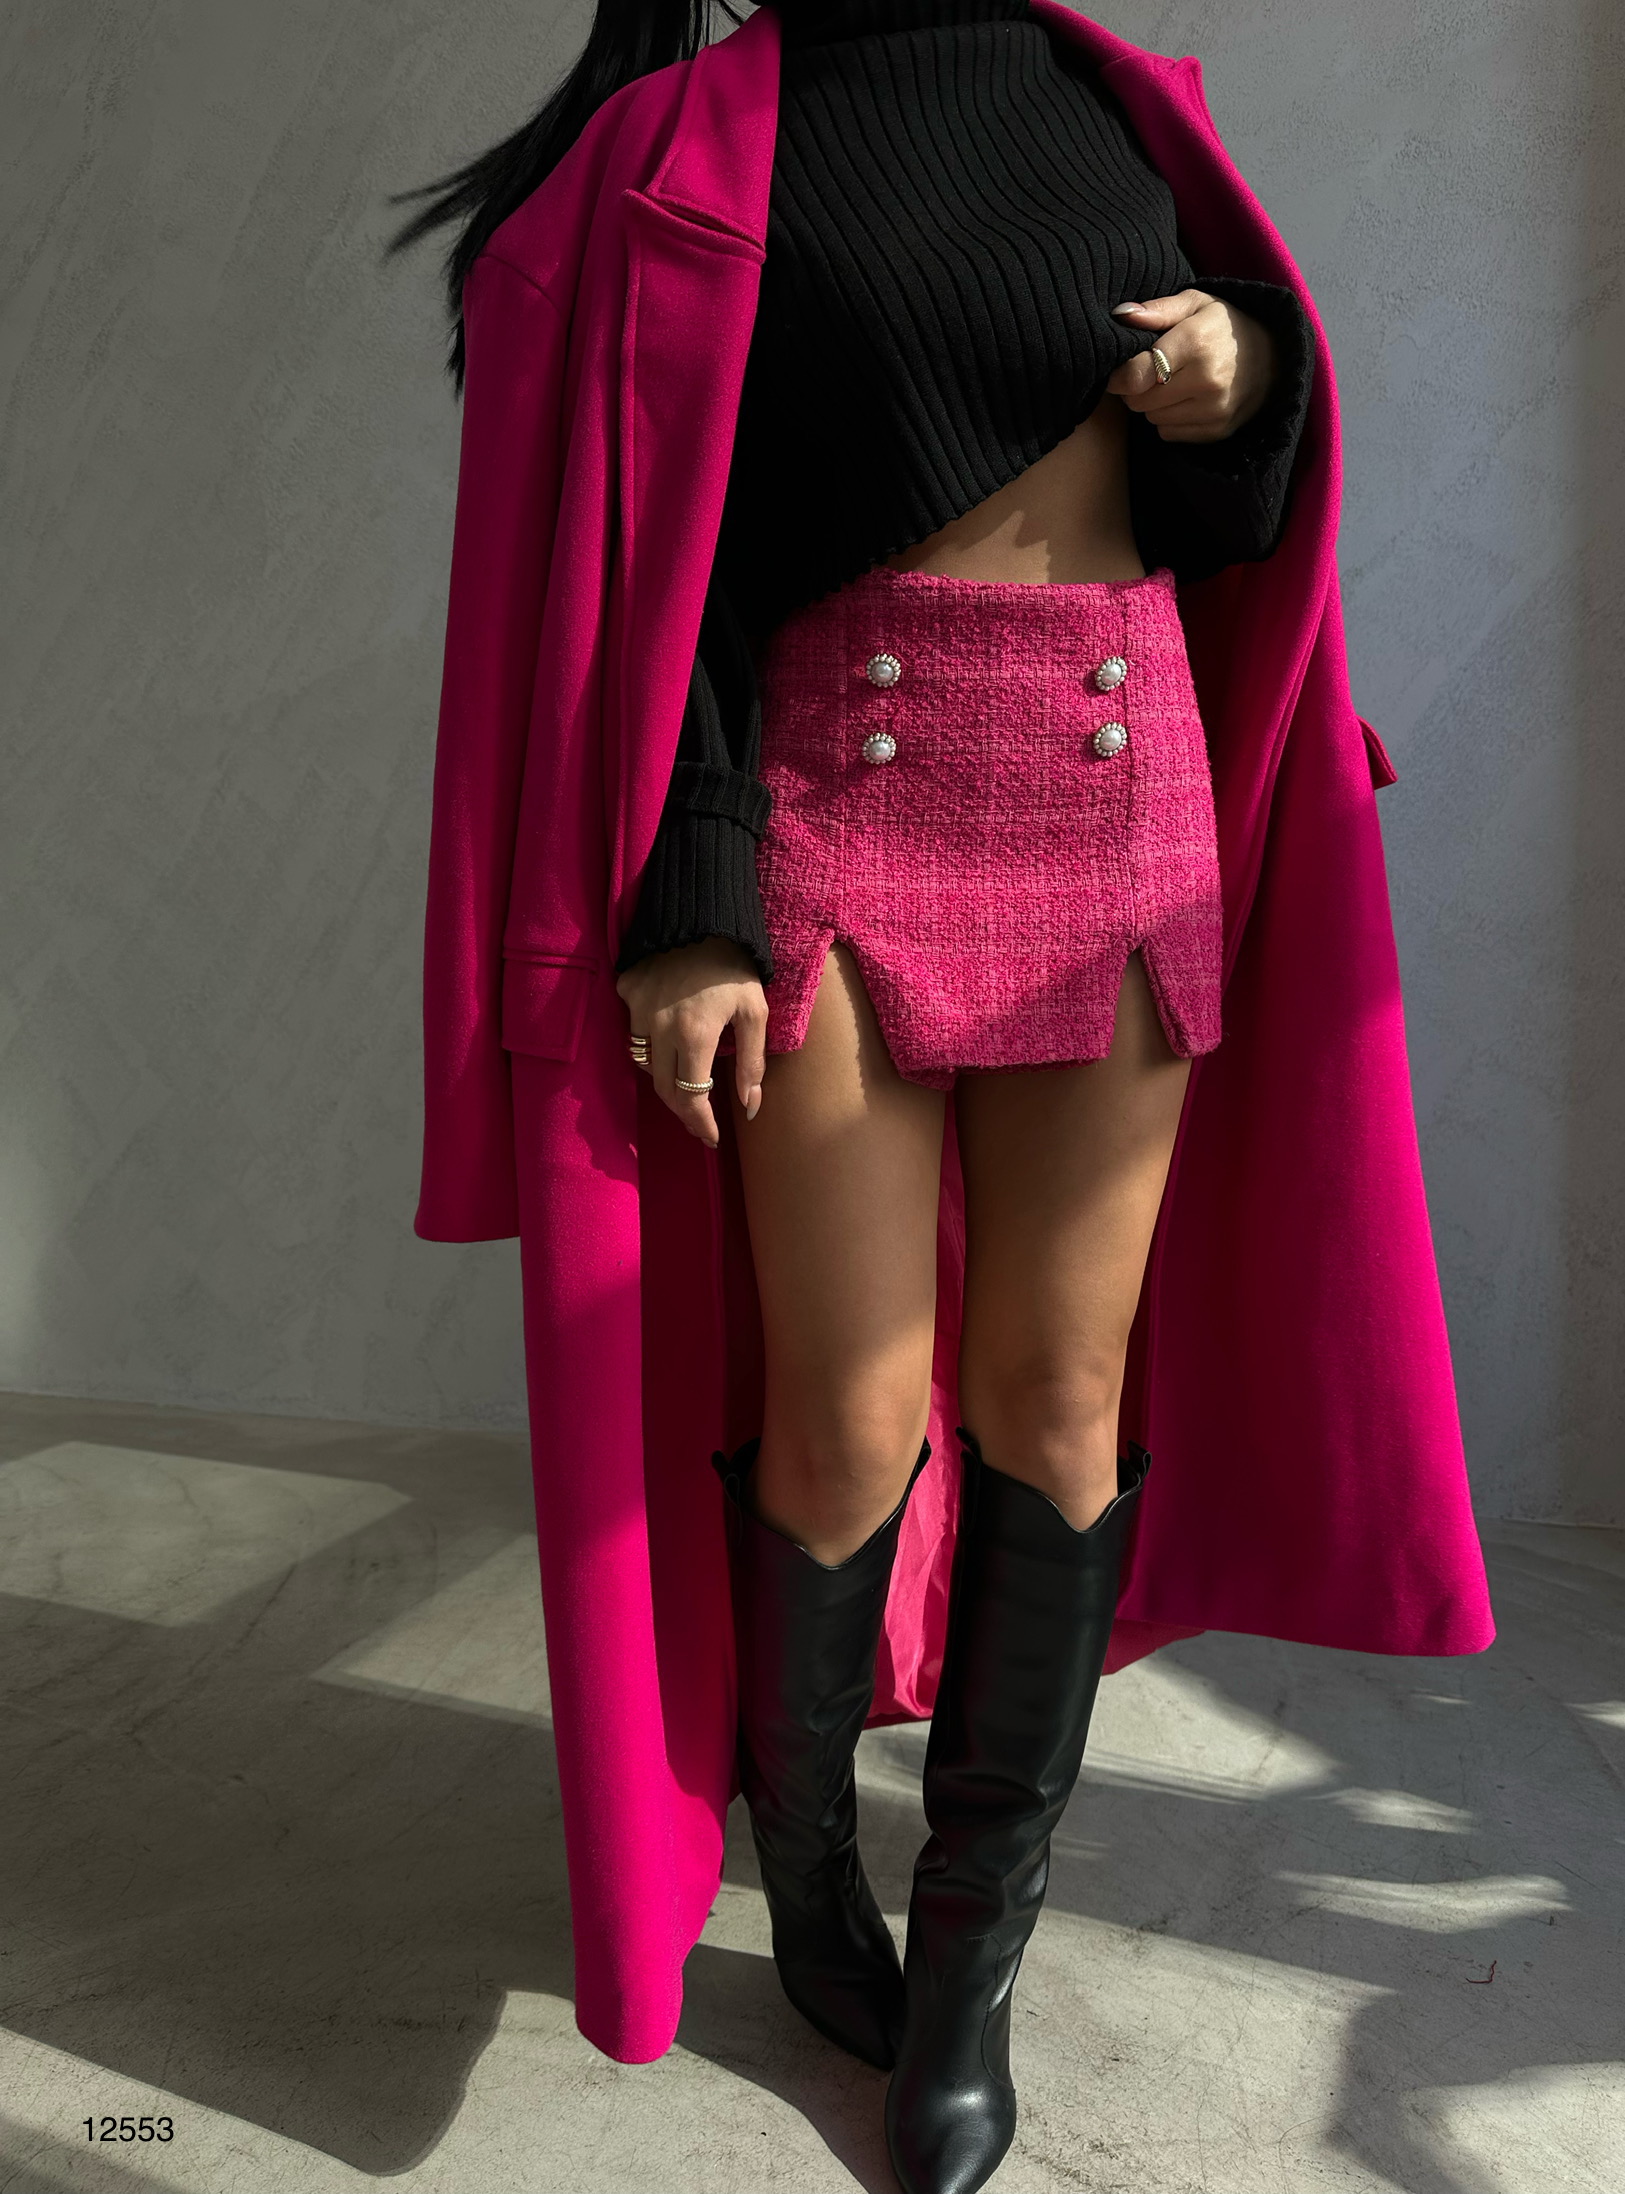 A model wears 37836 - Short Skirt - Pink, wholesale Skirt of Black Fashion to display at Lonca